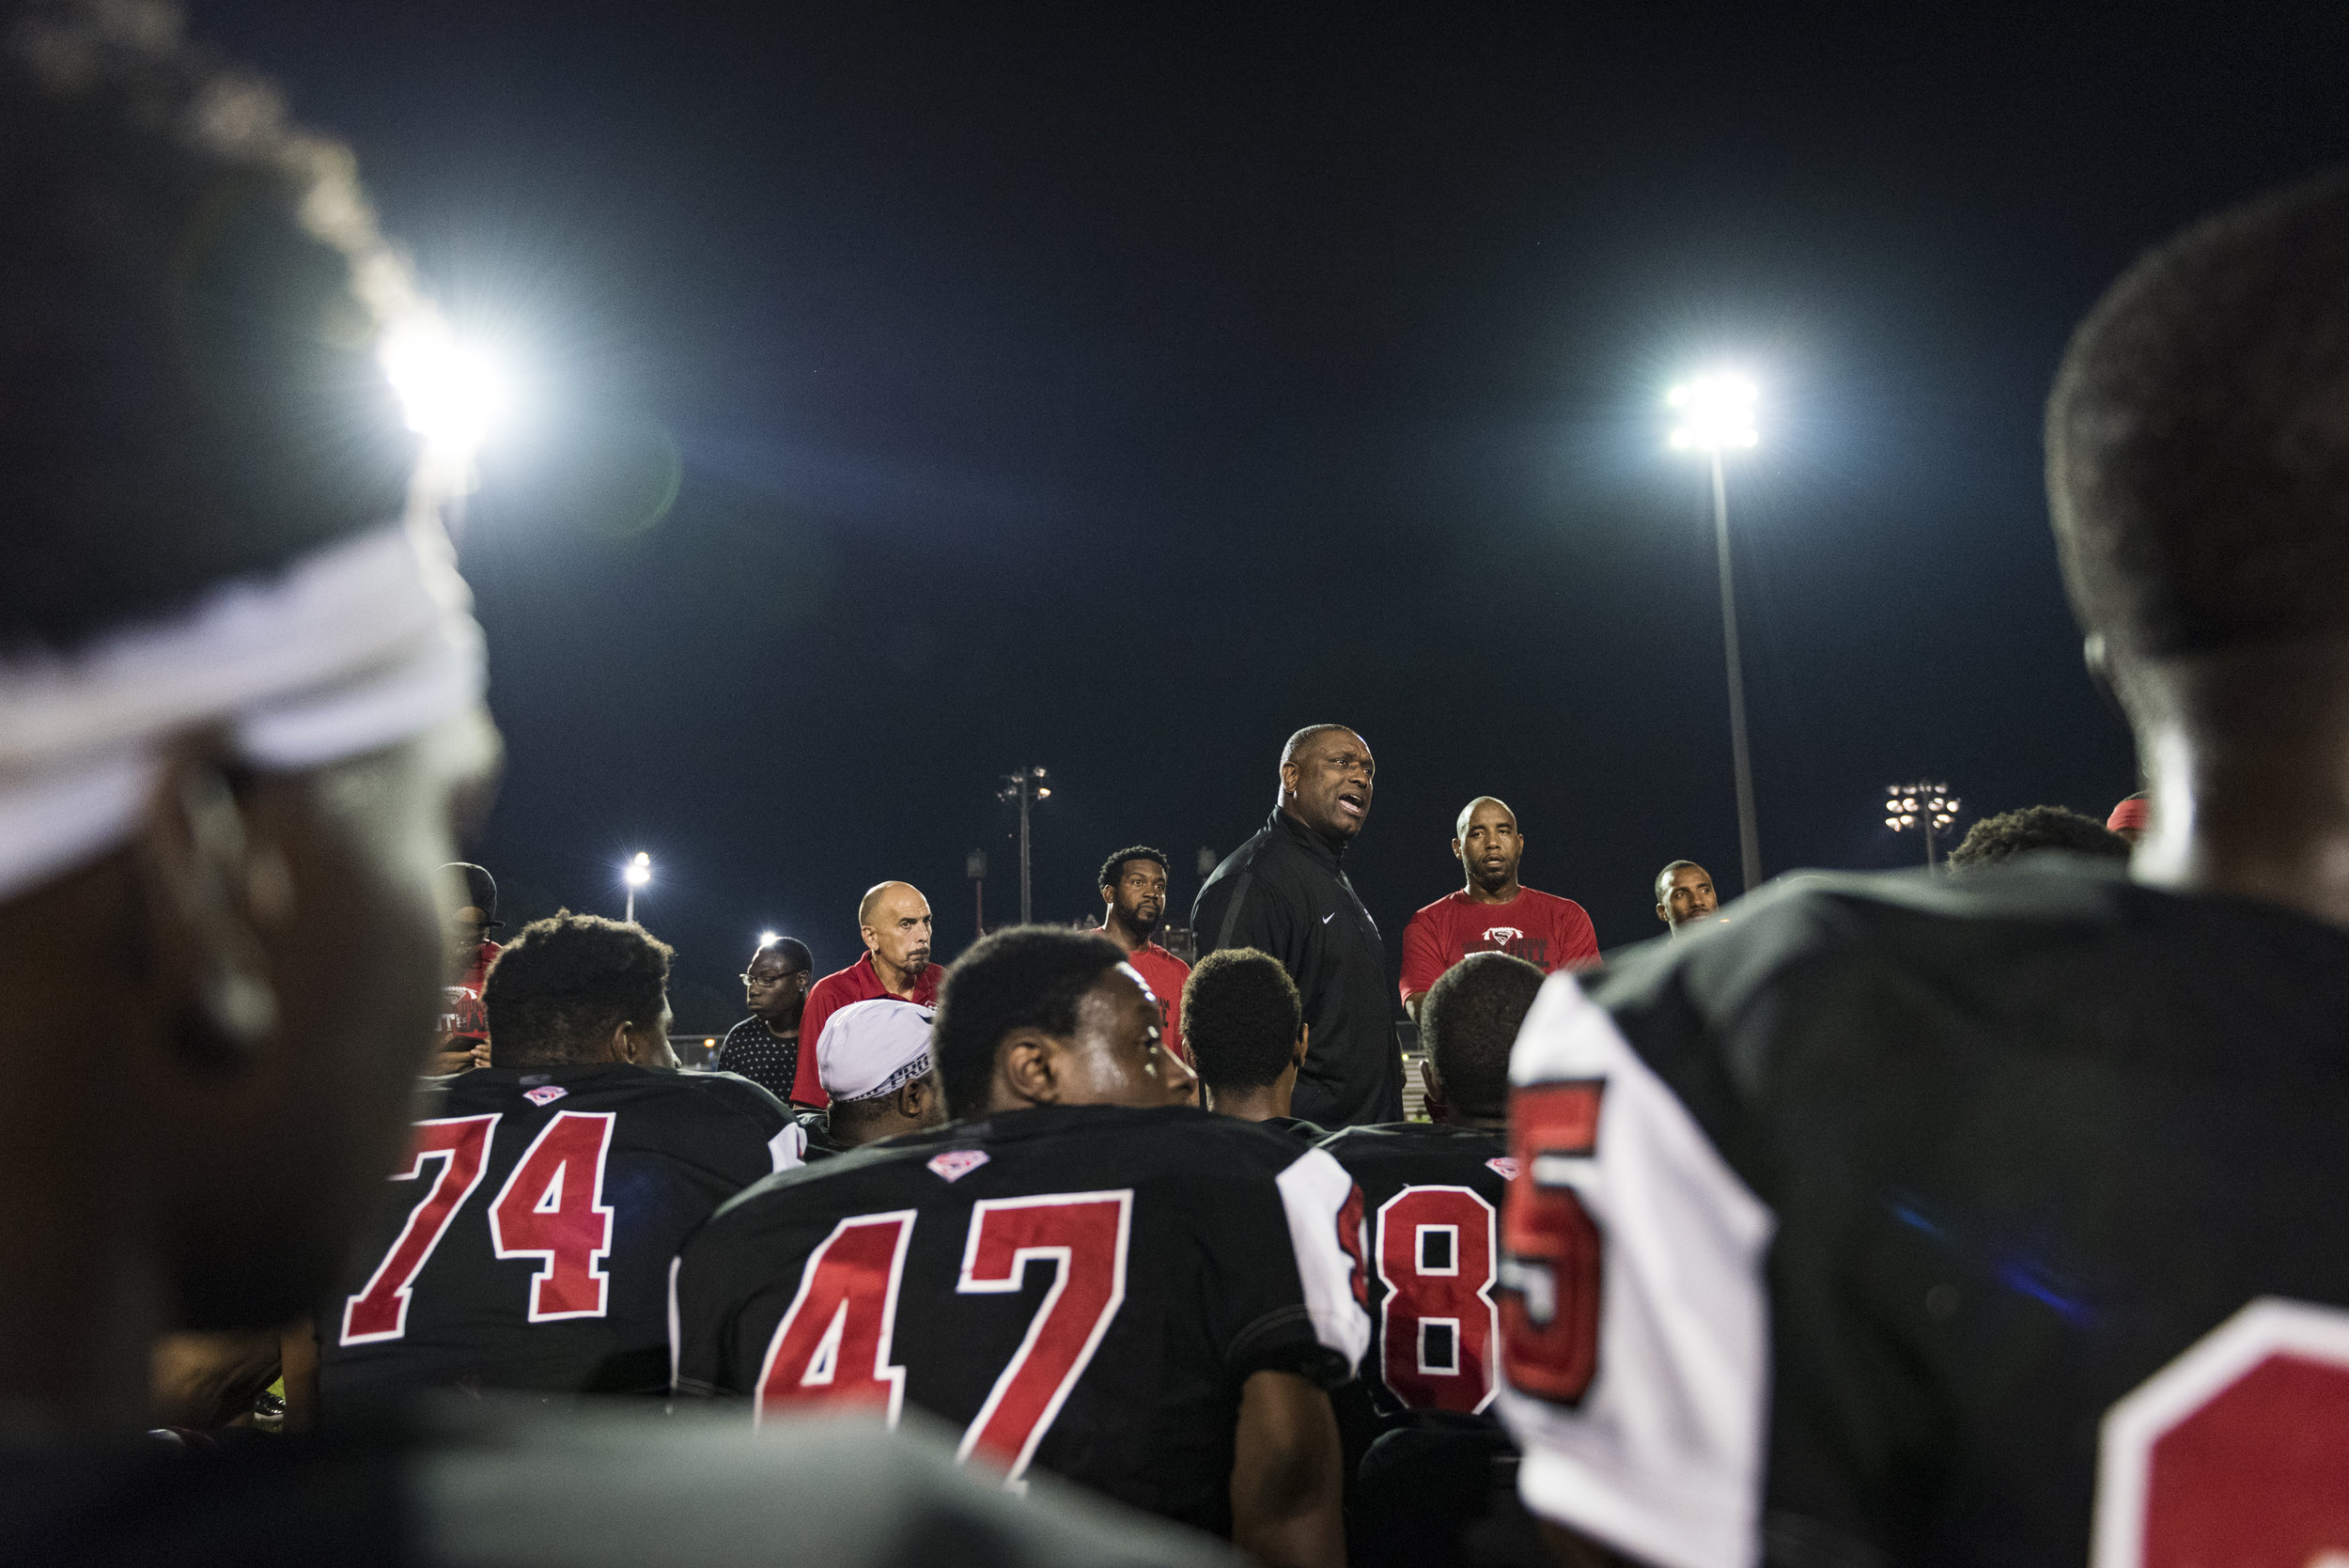  Southern Durham head coach Darius Robinson addresses his team after a big win against the the No. 4 team, Seventy-First High School. The Spartans scored nine points in the final 78 seconds of the game to finish the upset, 36-32. 